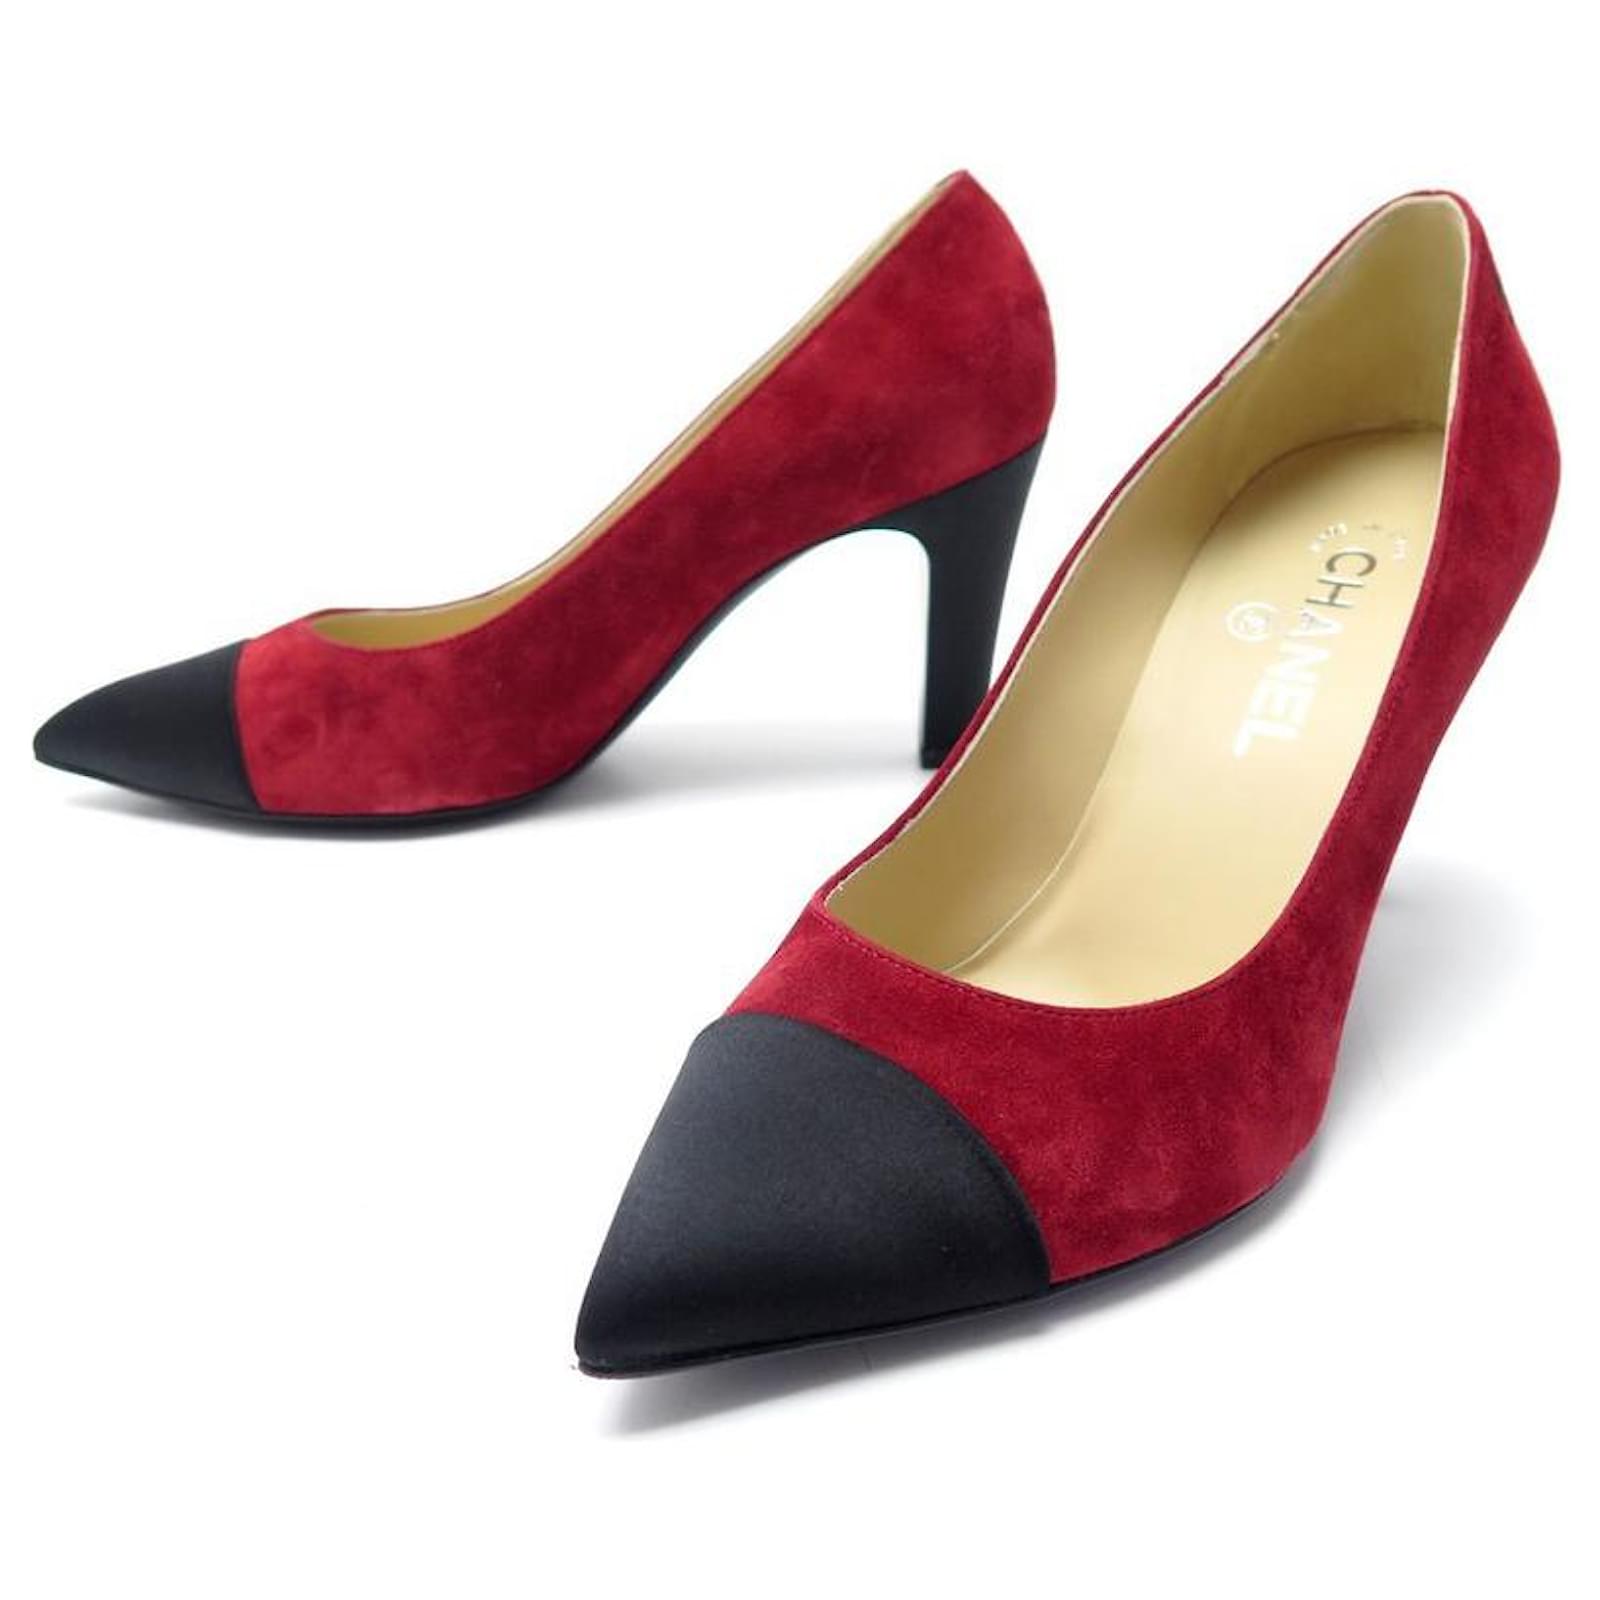 NEW CHANEL SHOES PUMPS GABRIELLE COCO G33085 39.5 SUEDE SHOES Red